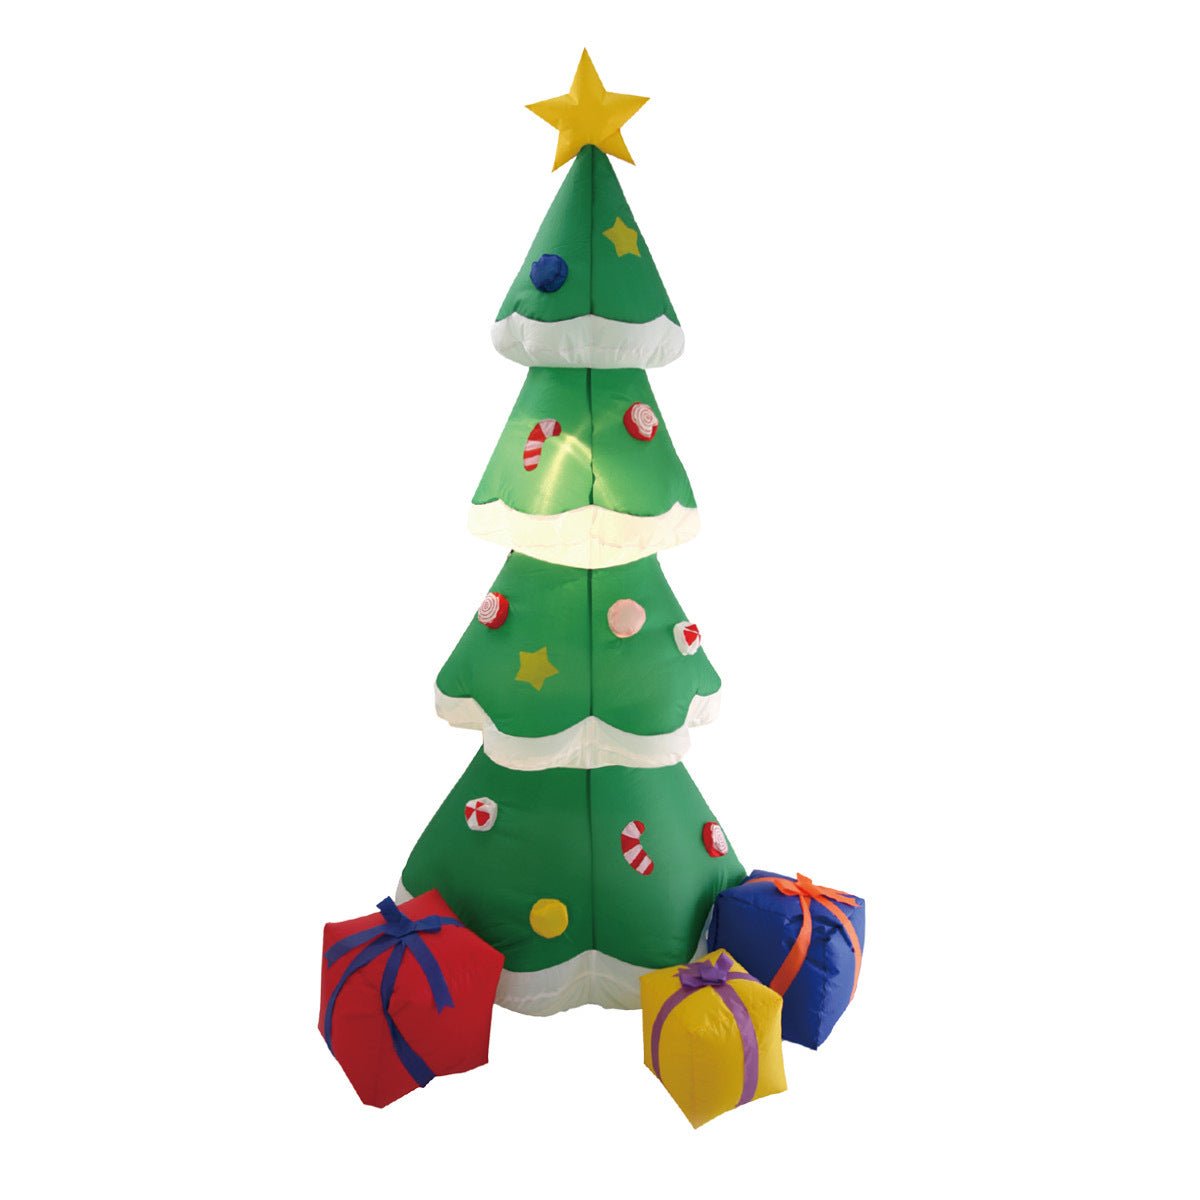 Christmas By Sas 1.8m Self Inflatable LED Tree With Presents - Little Kids Business